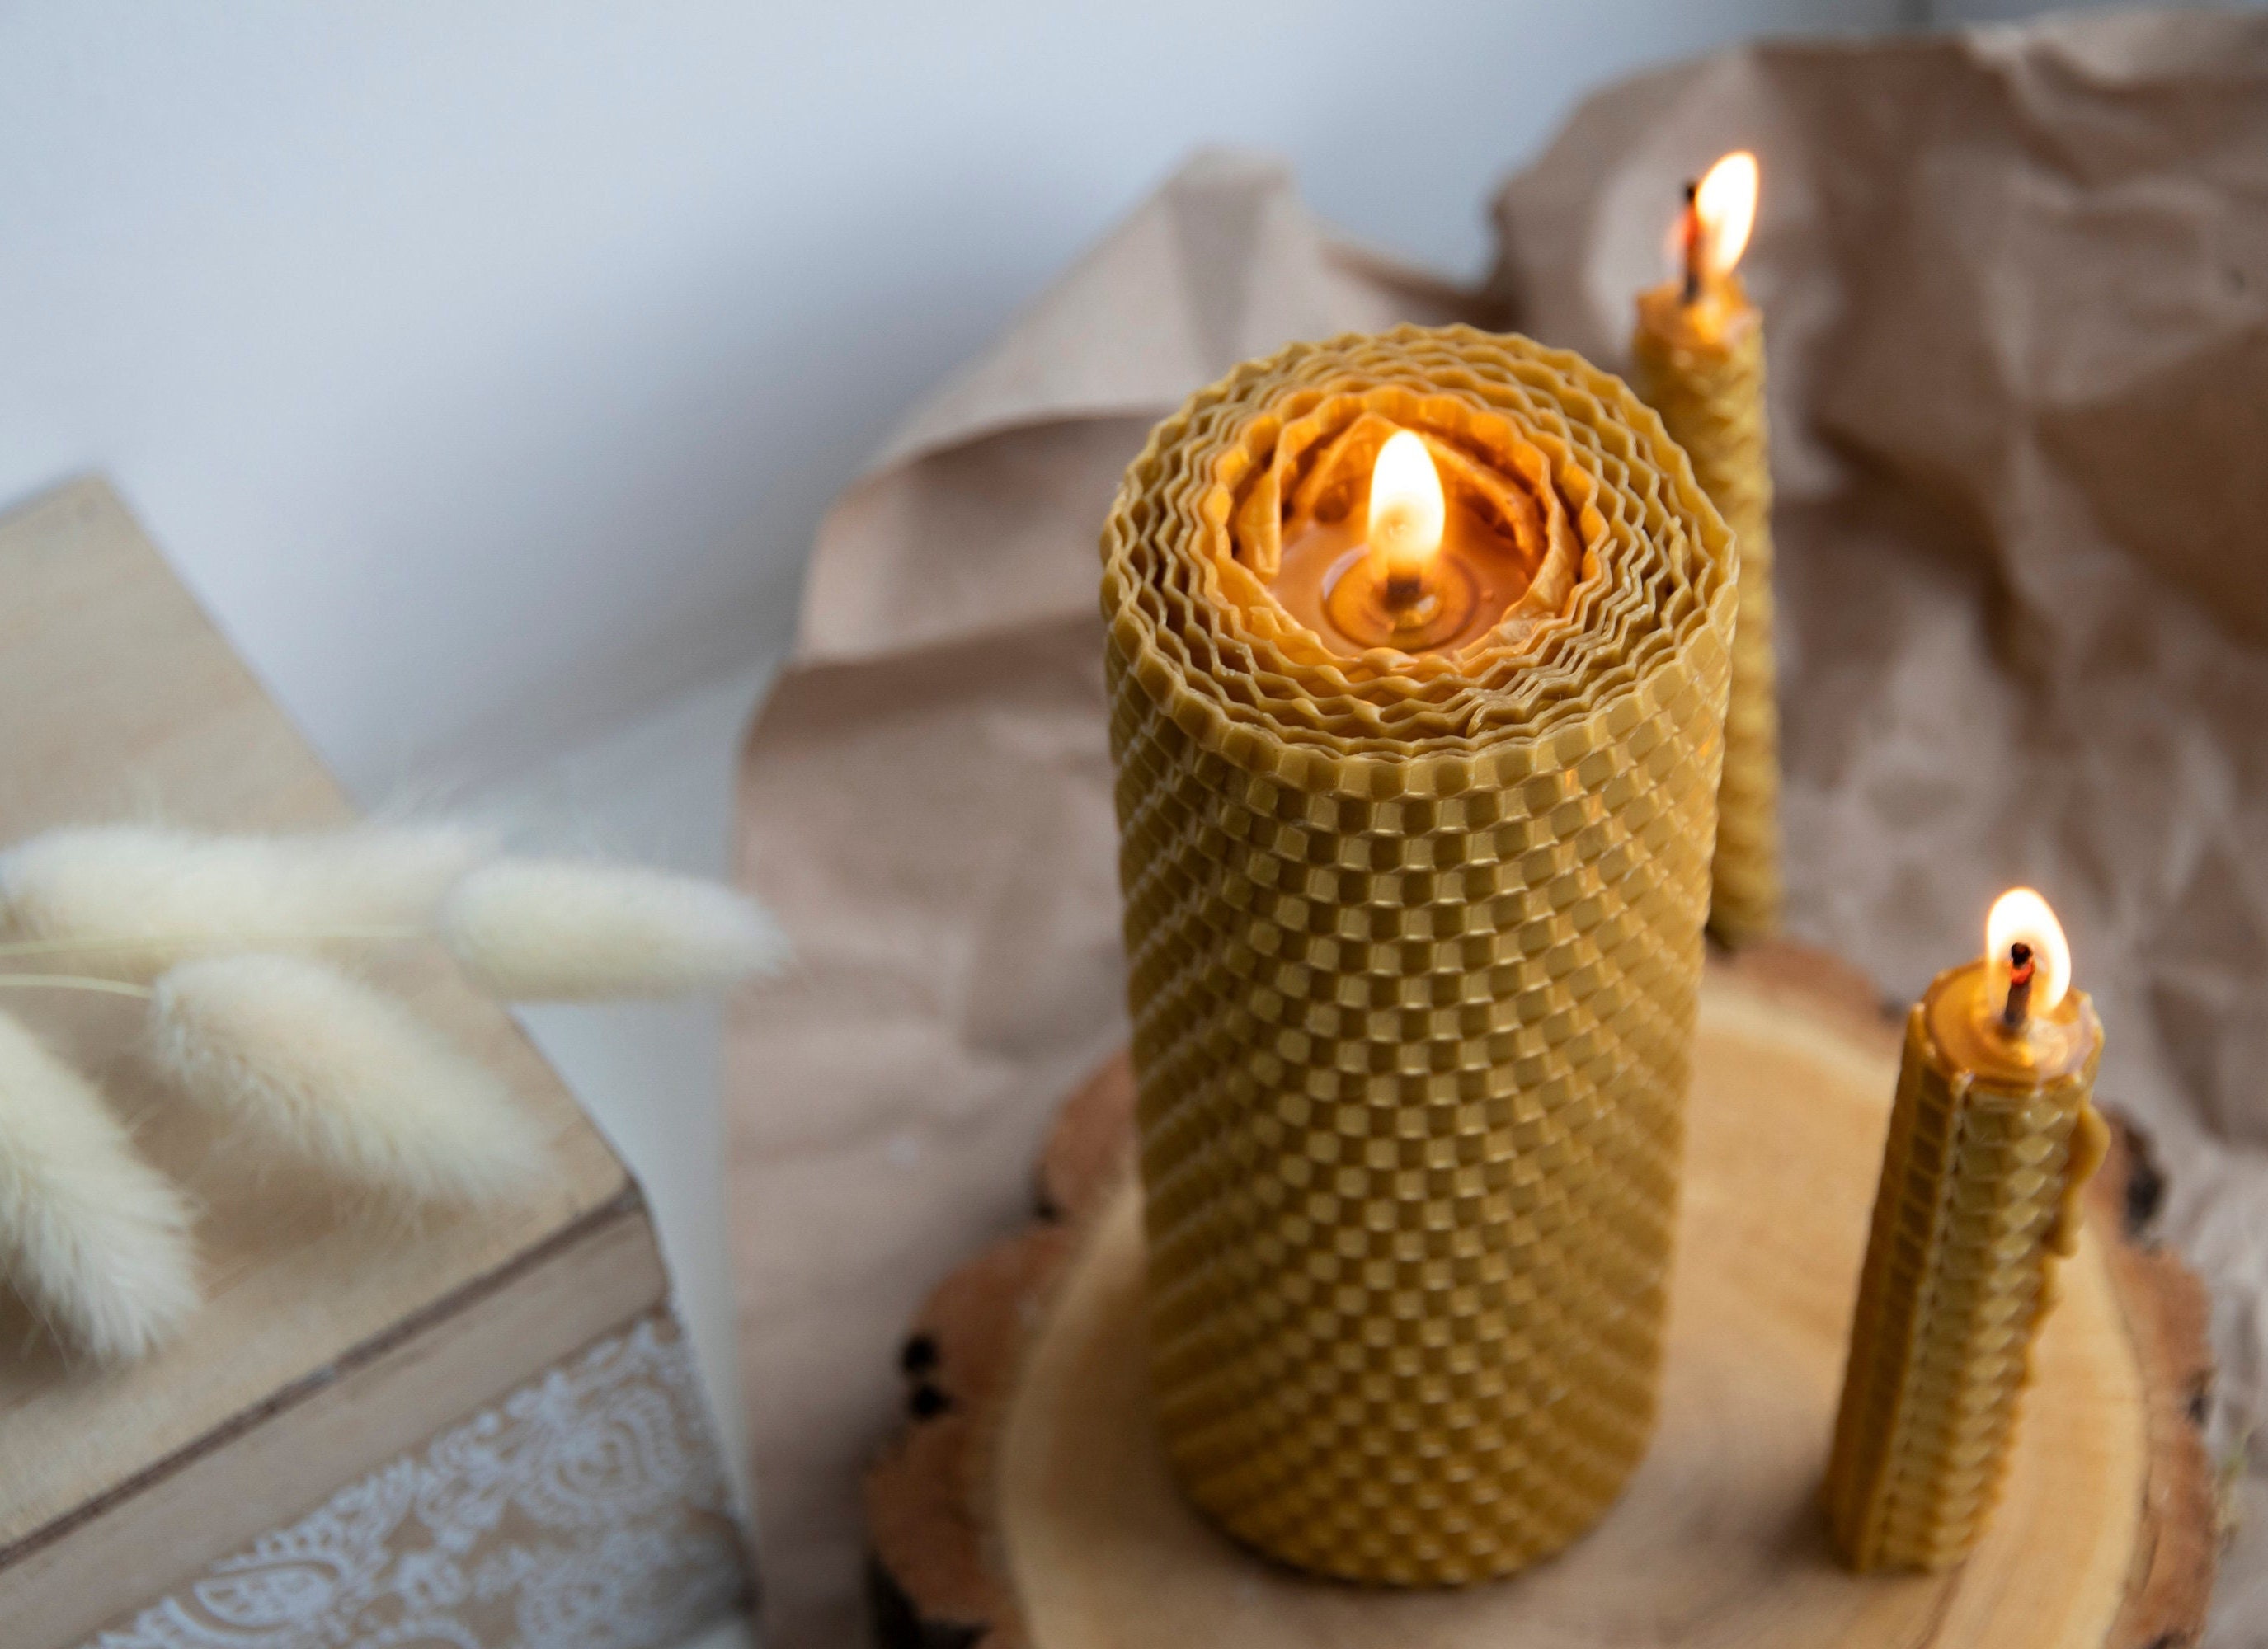 Honey Comb Beeswax Candle X2 Large and Small Beeswax Pillar Candle